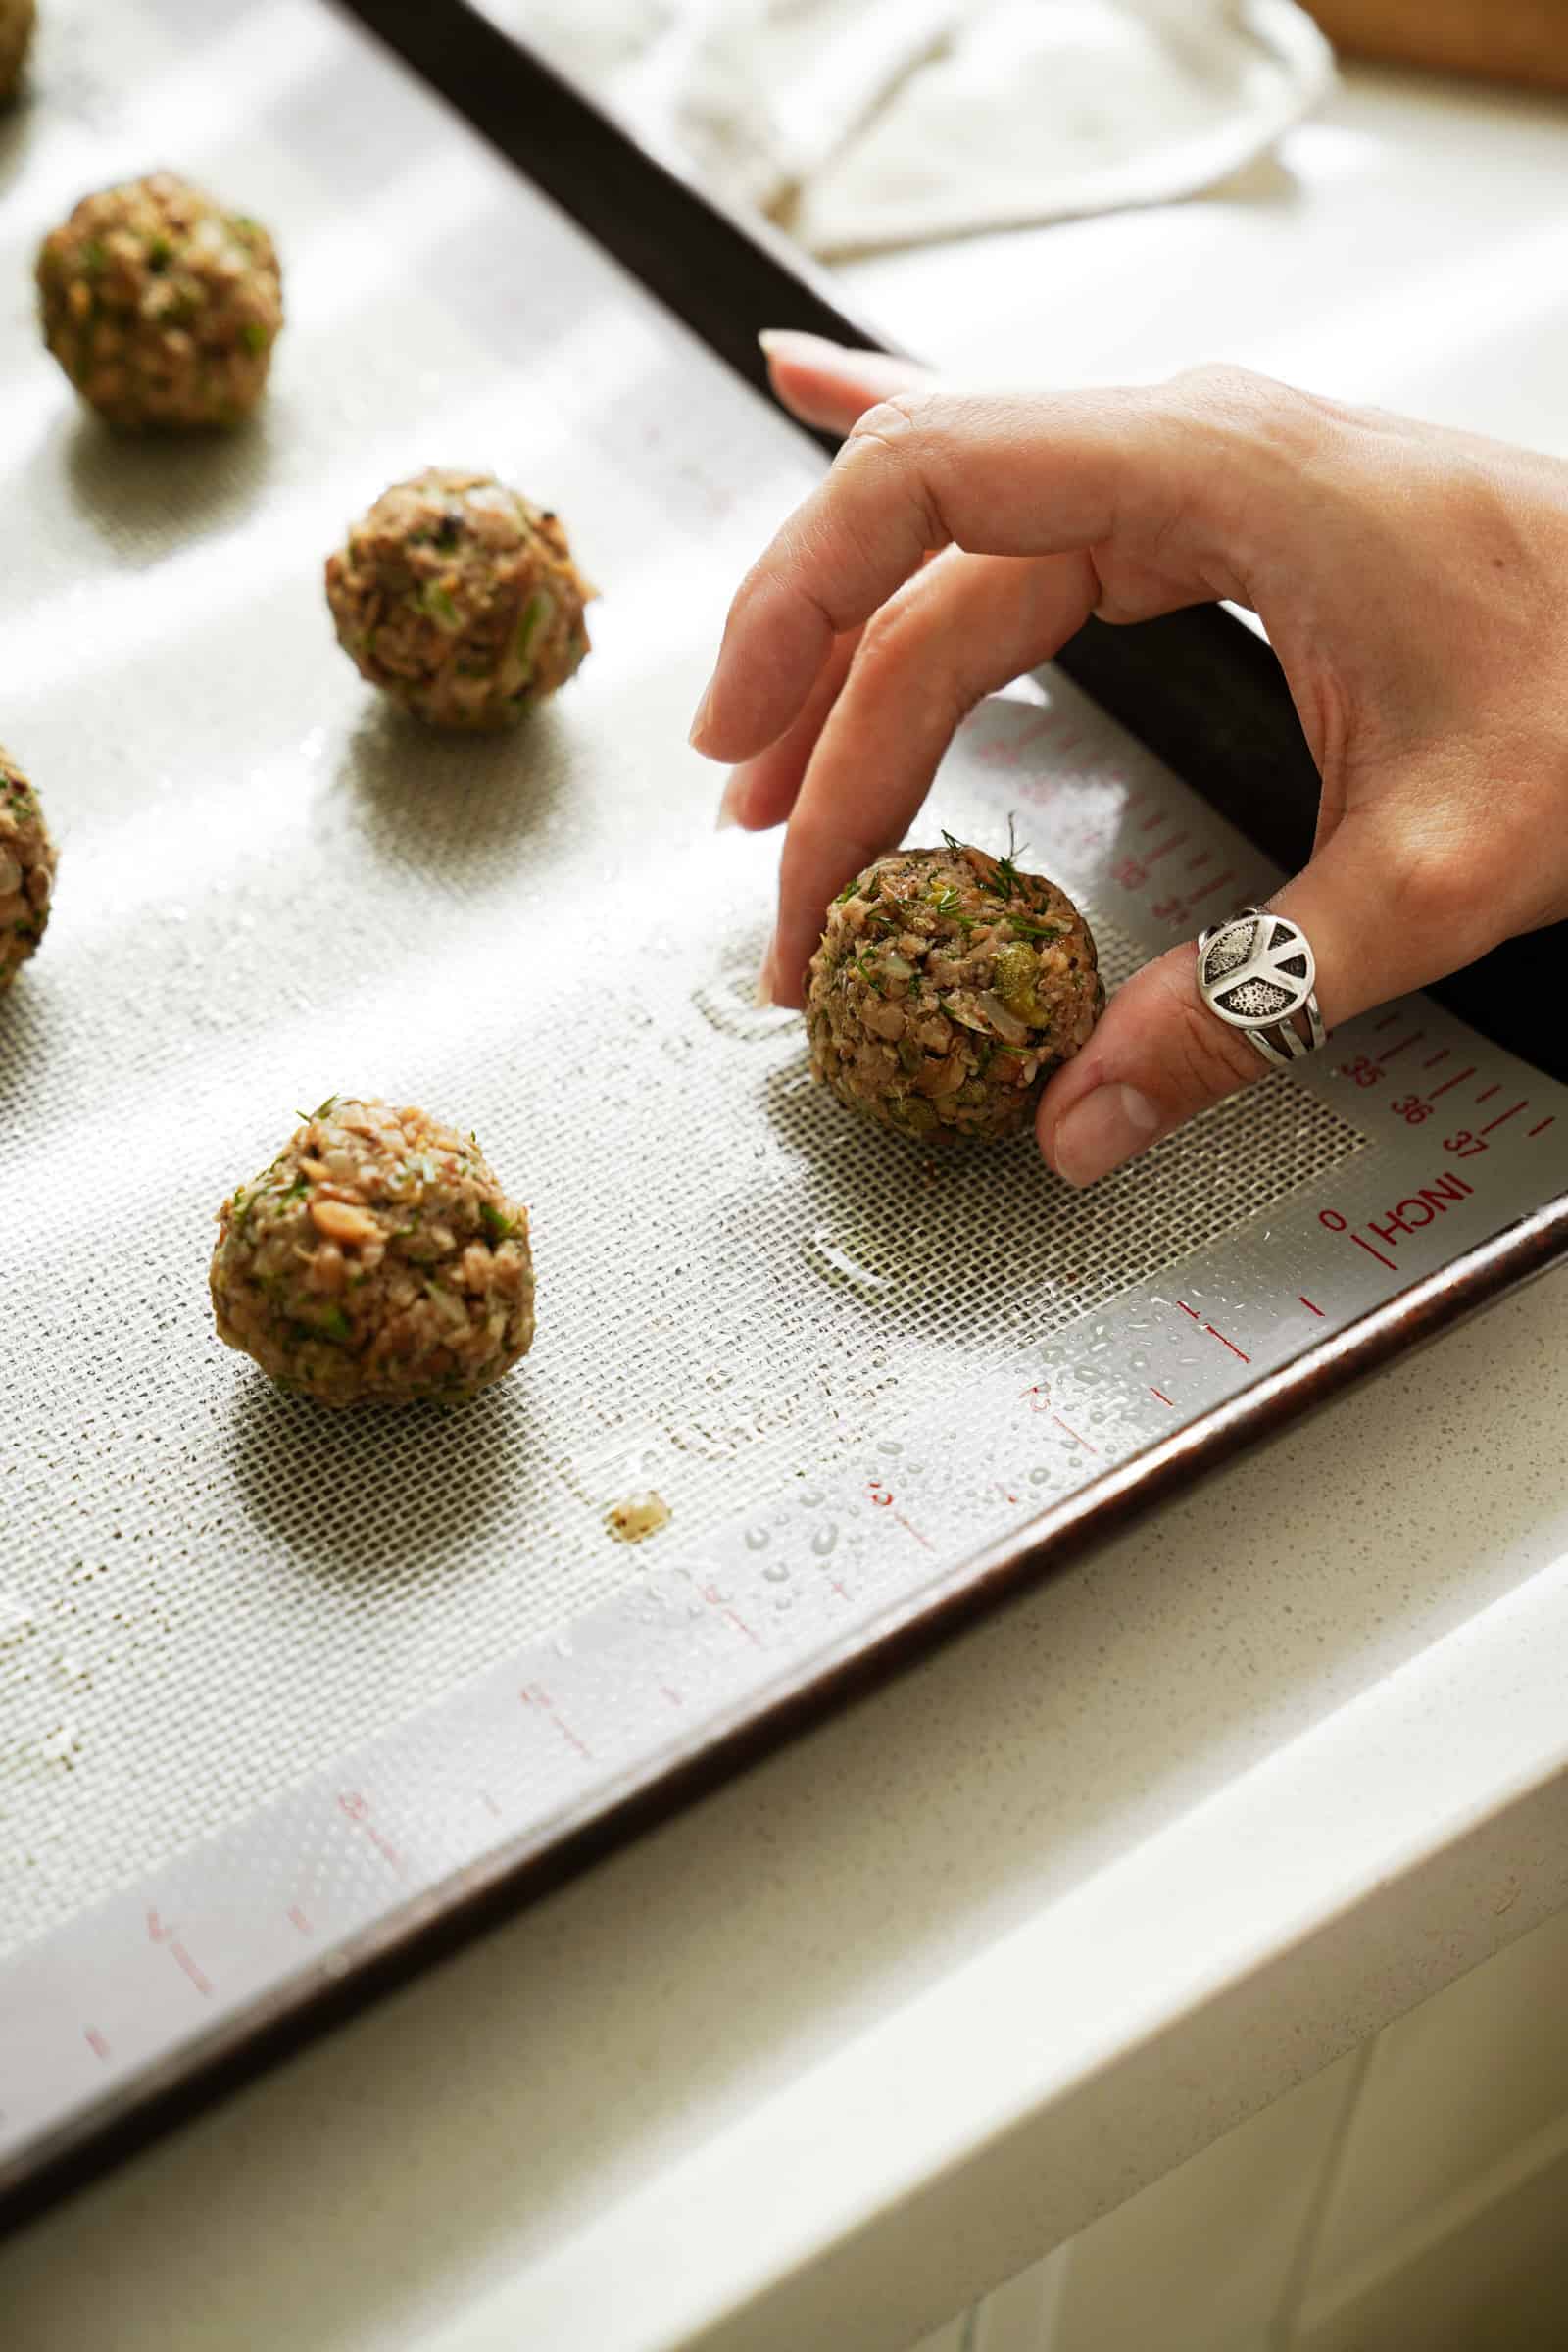 Meatballs on a tray ready to bake